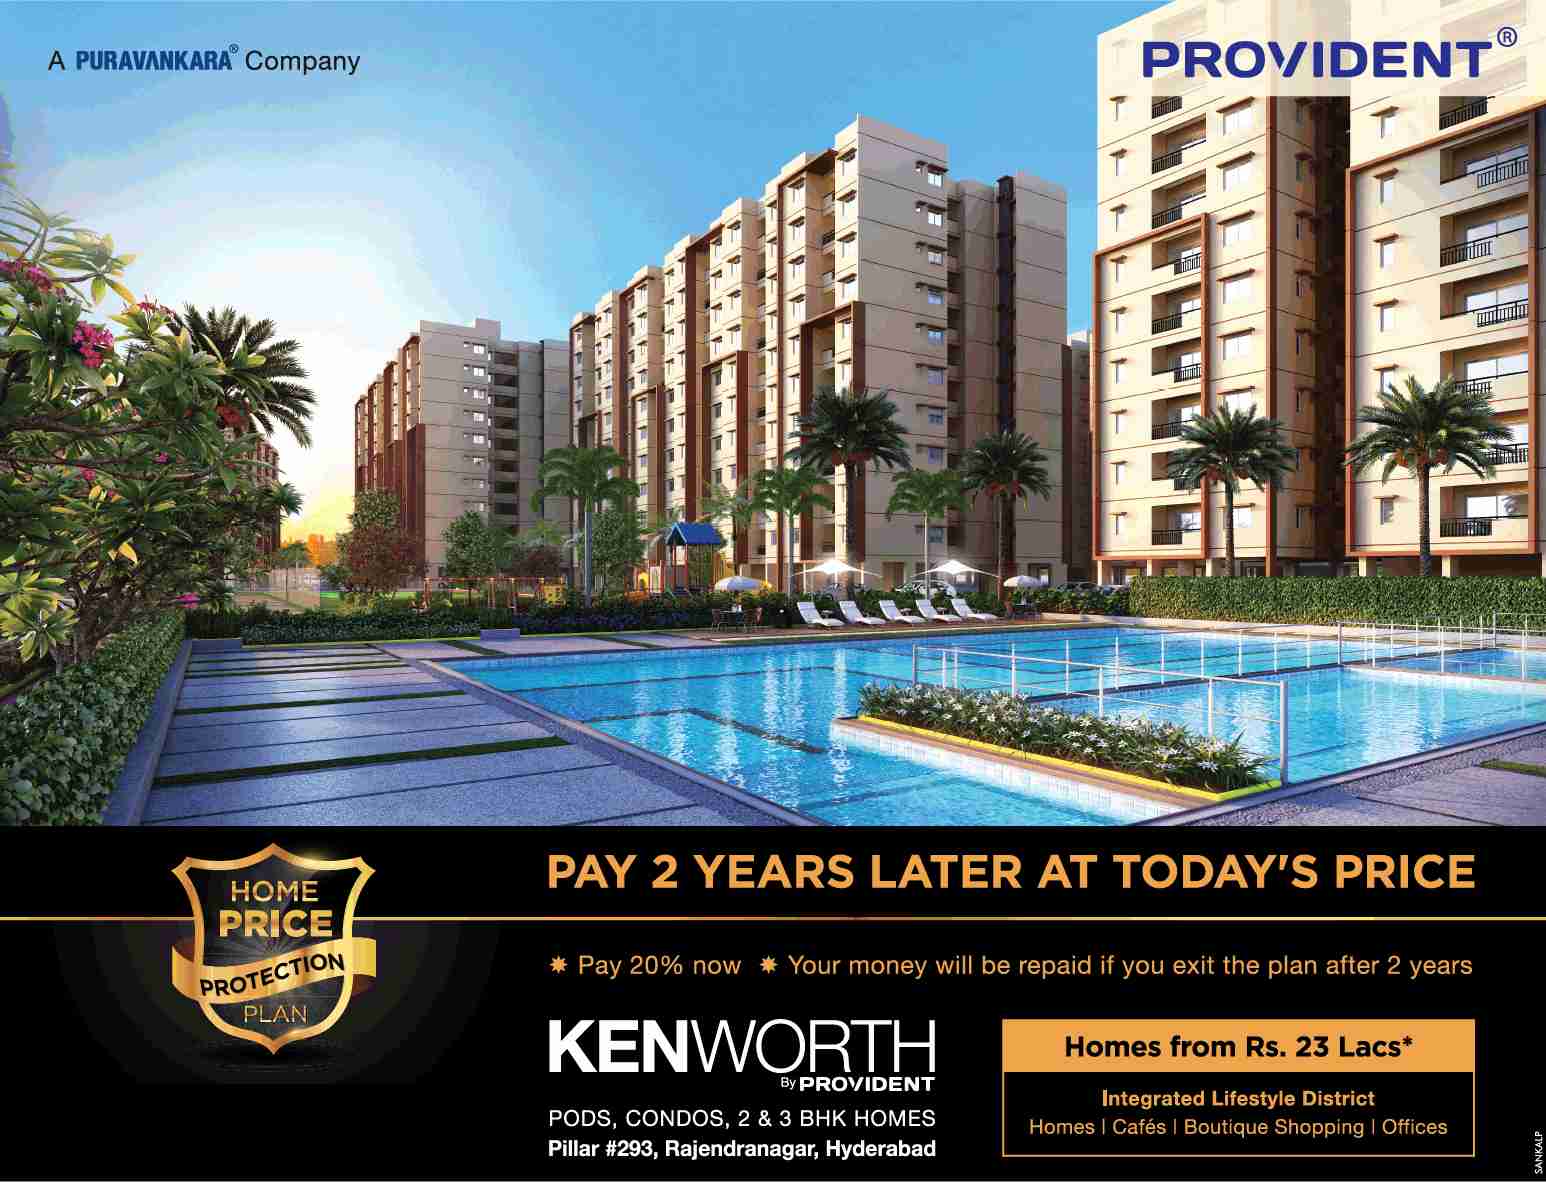 Pay 20% now & book your home at Provident Kenworth in Hyderabad